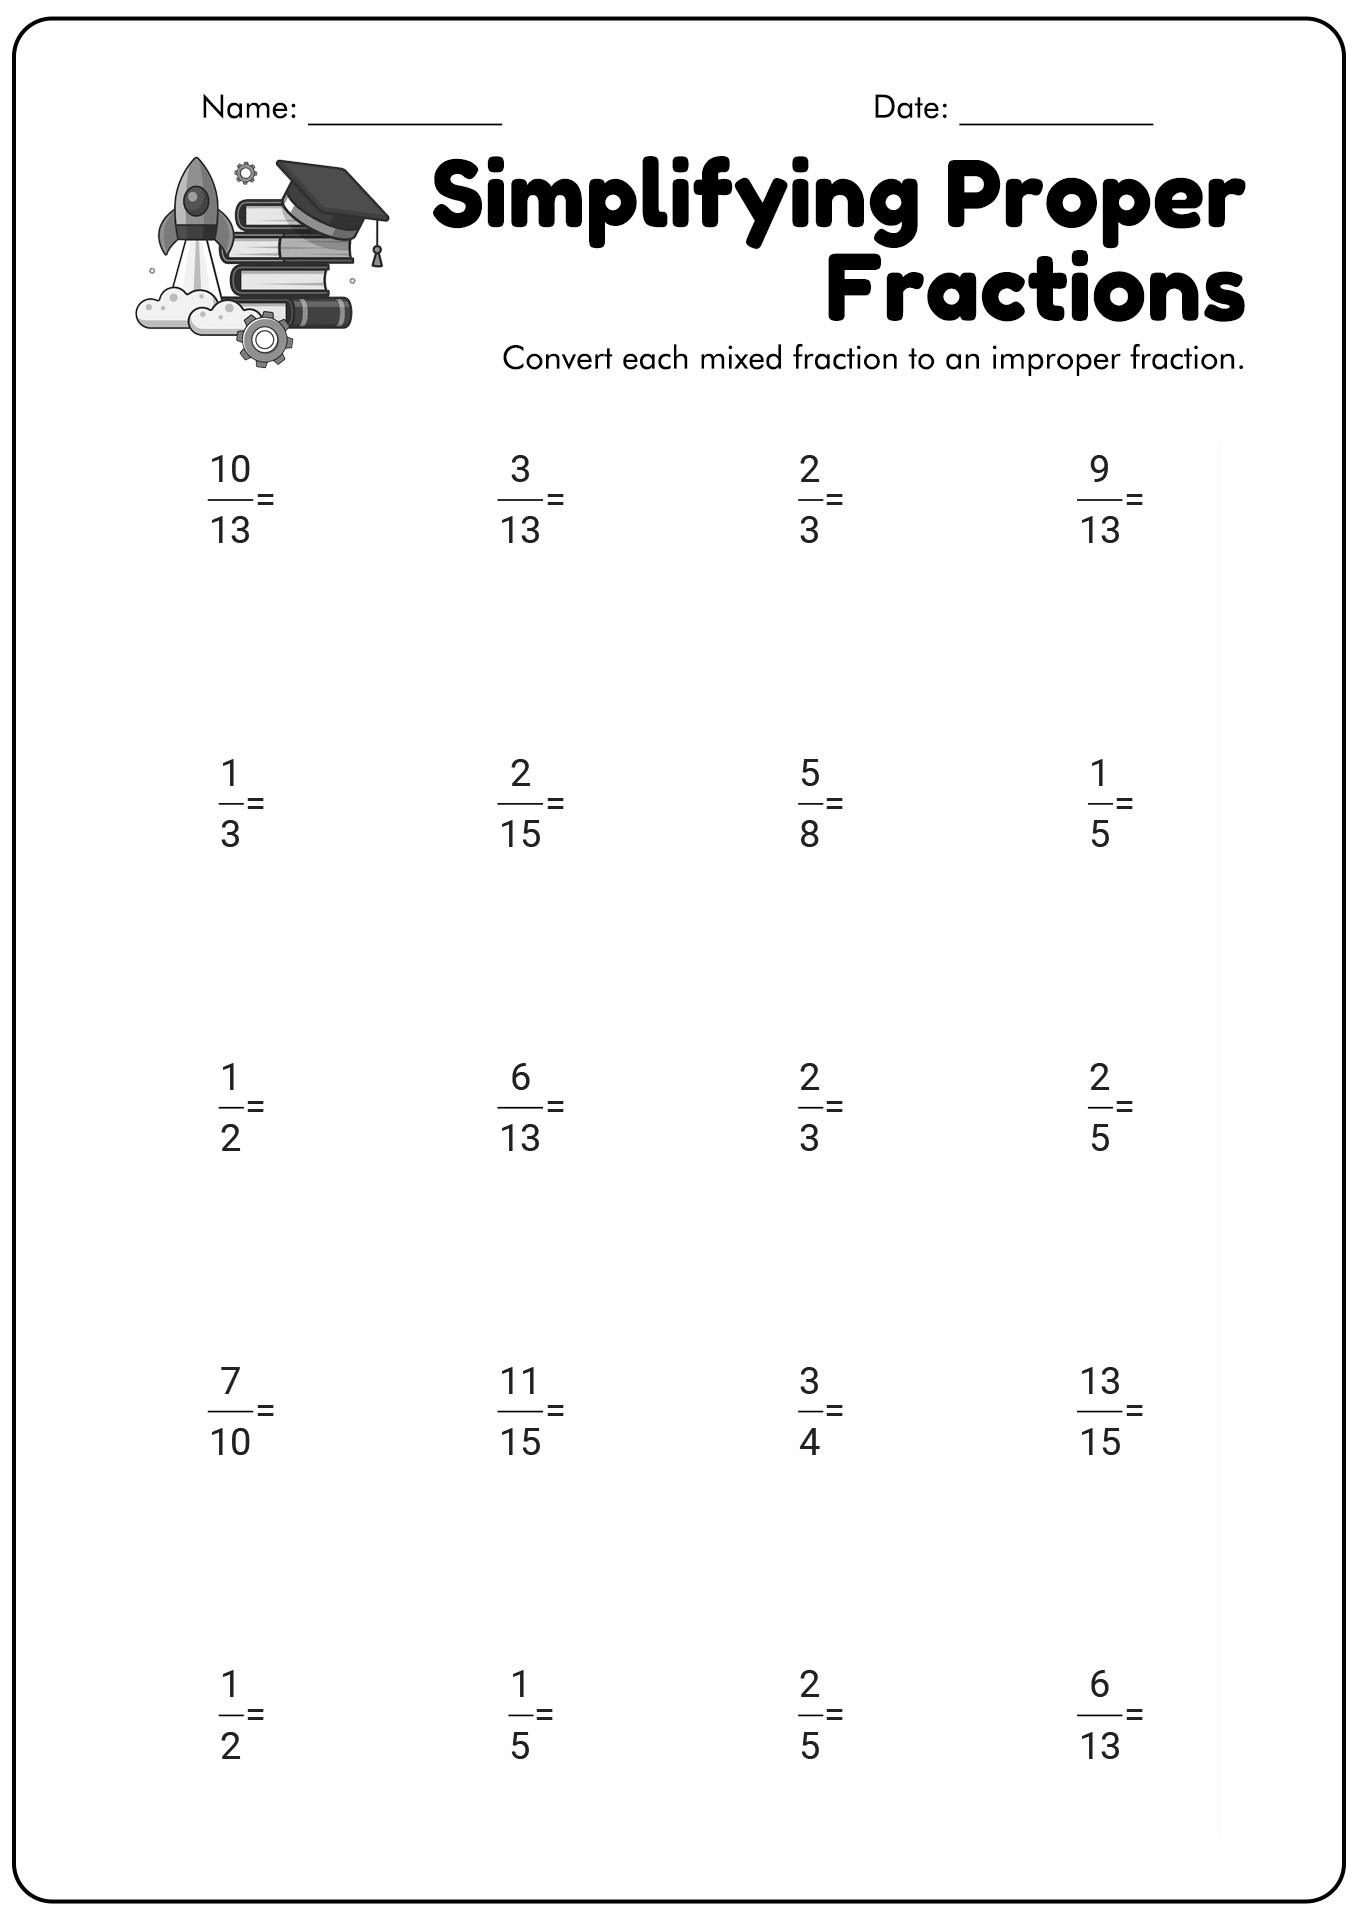 16-best-images-of-simplifying-fractions-worksheets-grade-6-6th-grade